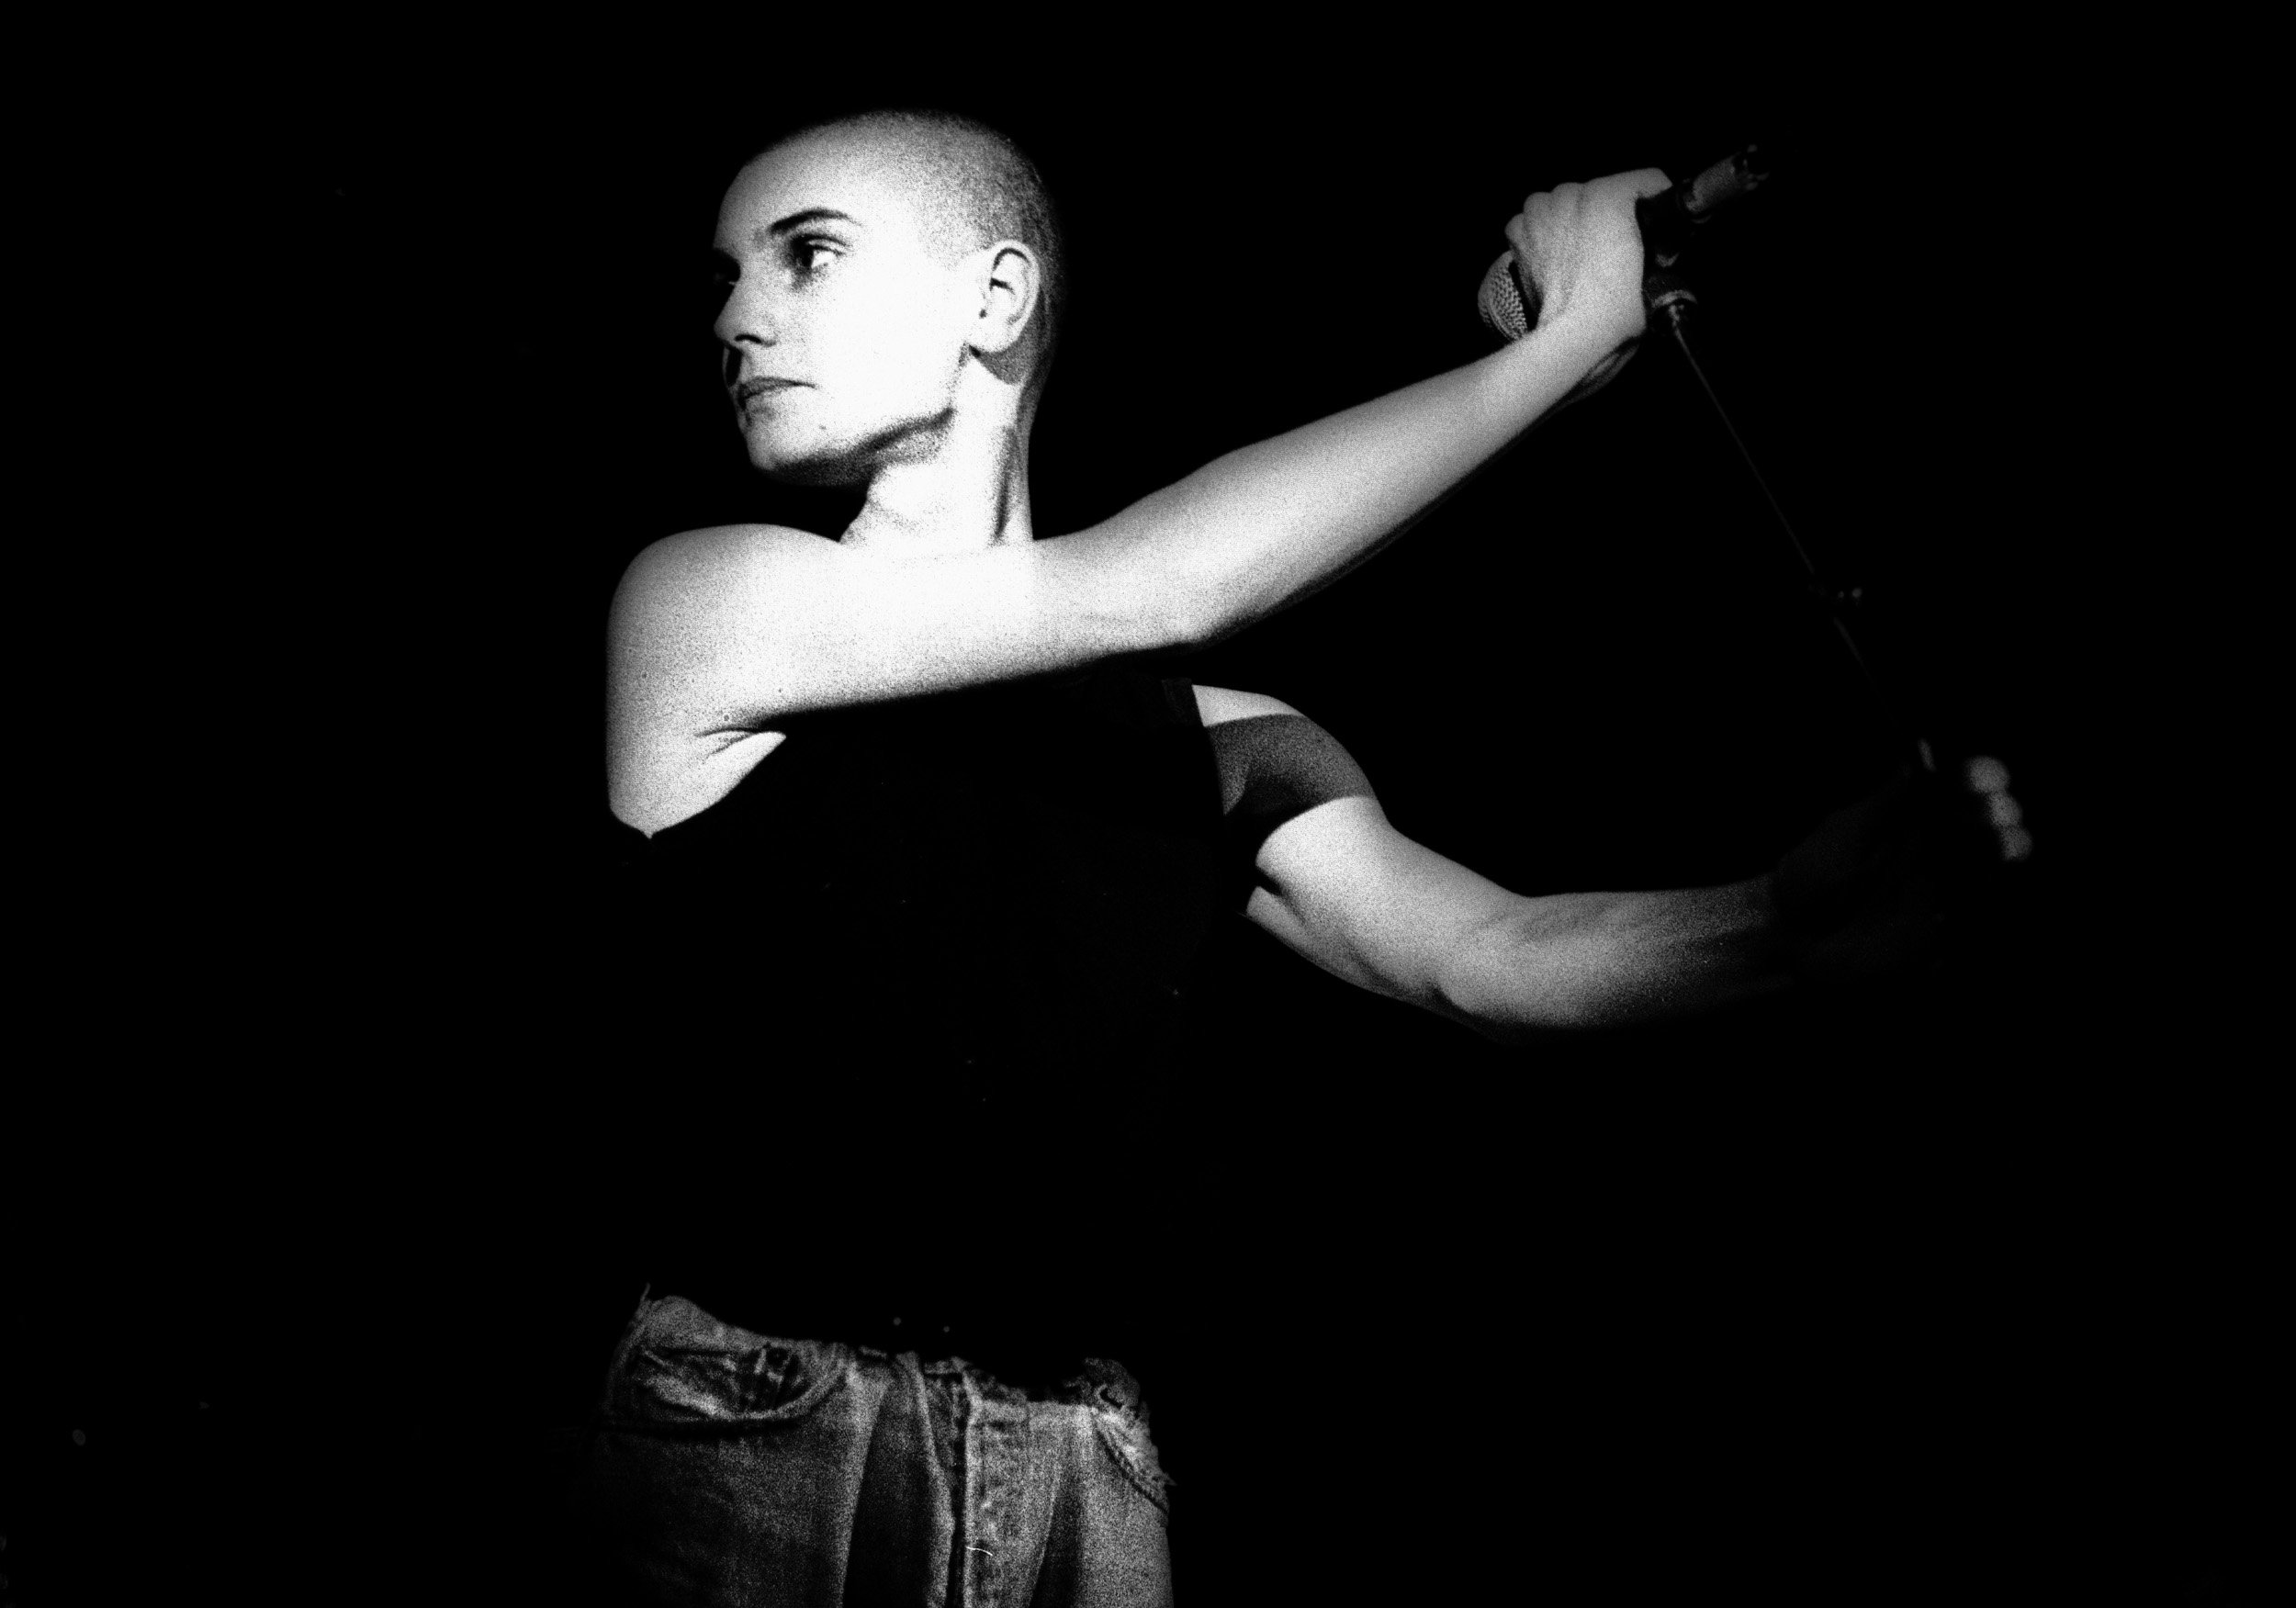 Irish singer Sinéad O'Connor holds a microphone stand in concert in 1988